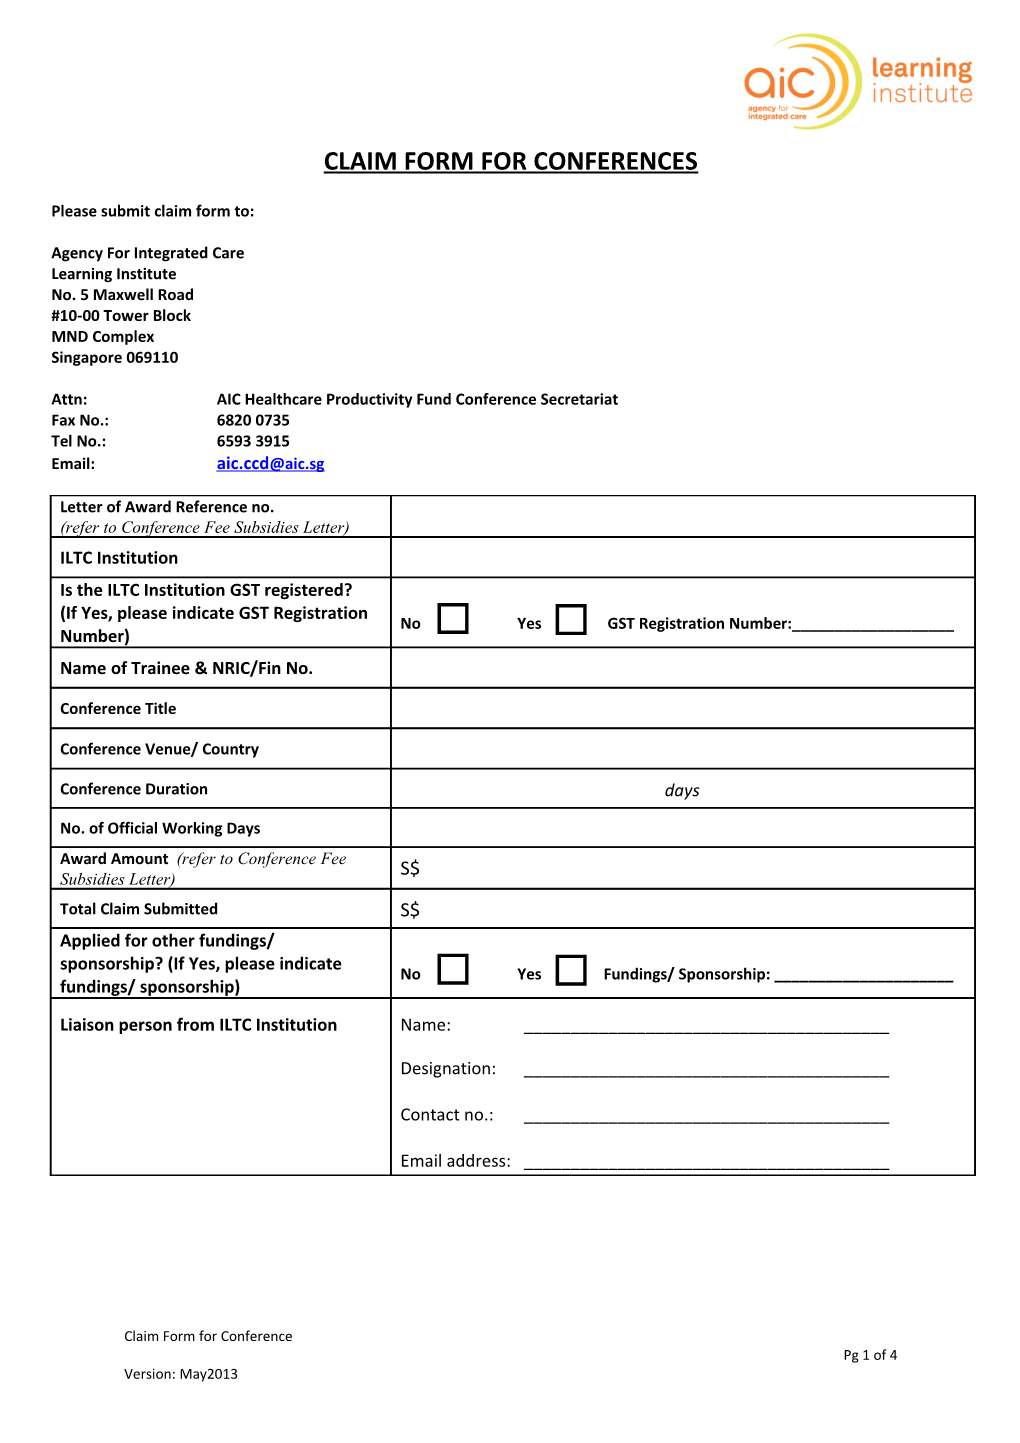 Claim Form for Conferences